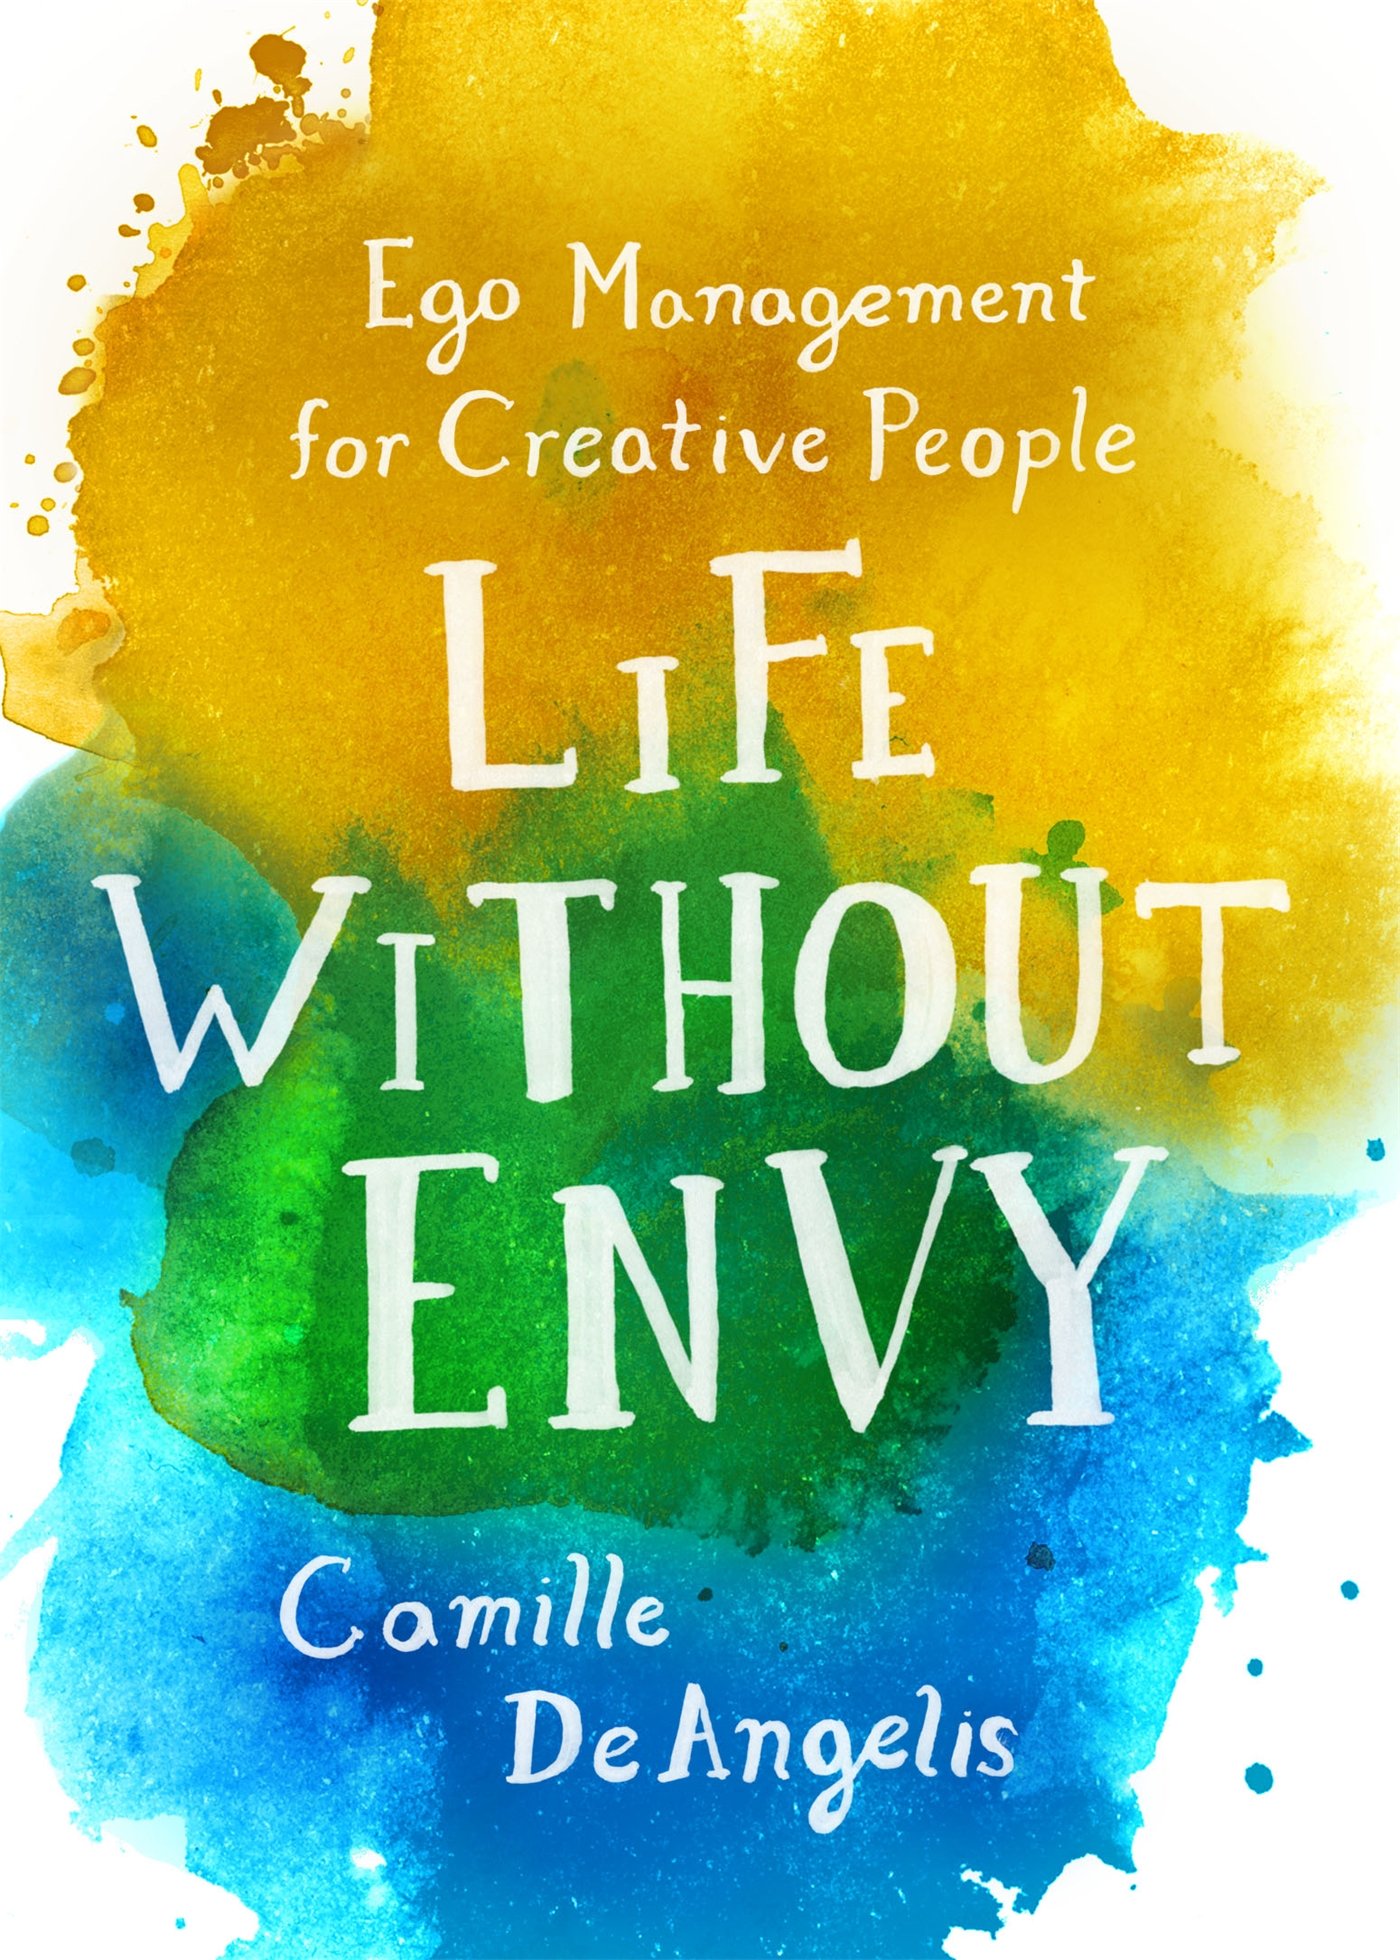 Life Without Envy by Camille DeAngeles; Tenth Crow Creative graphic designer gift guide